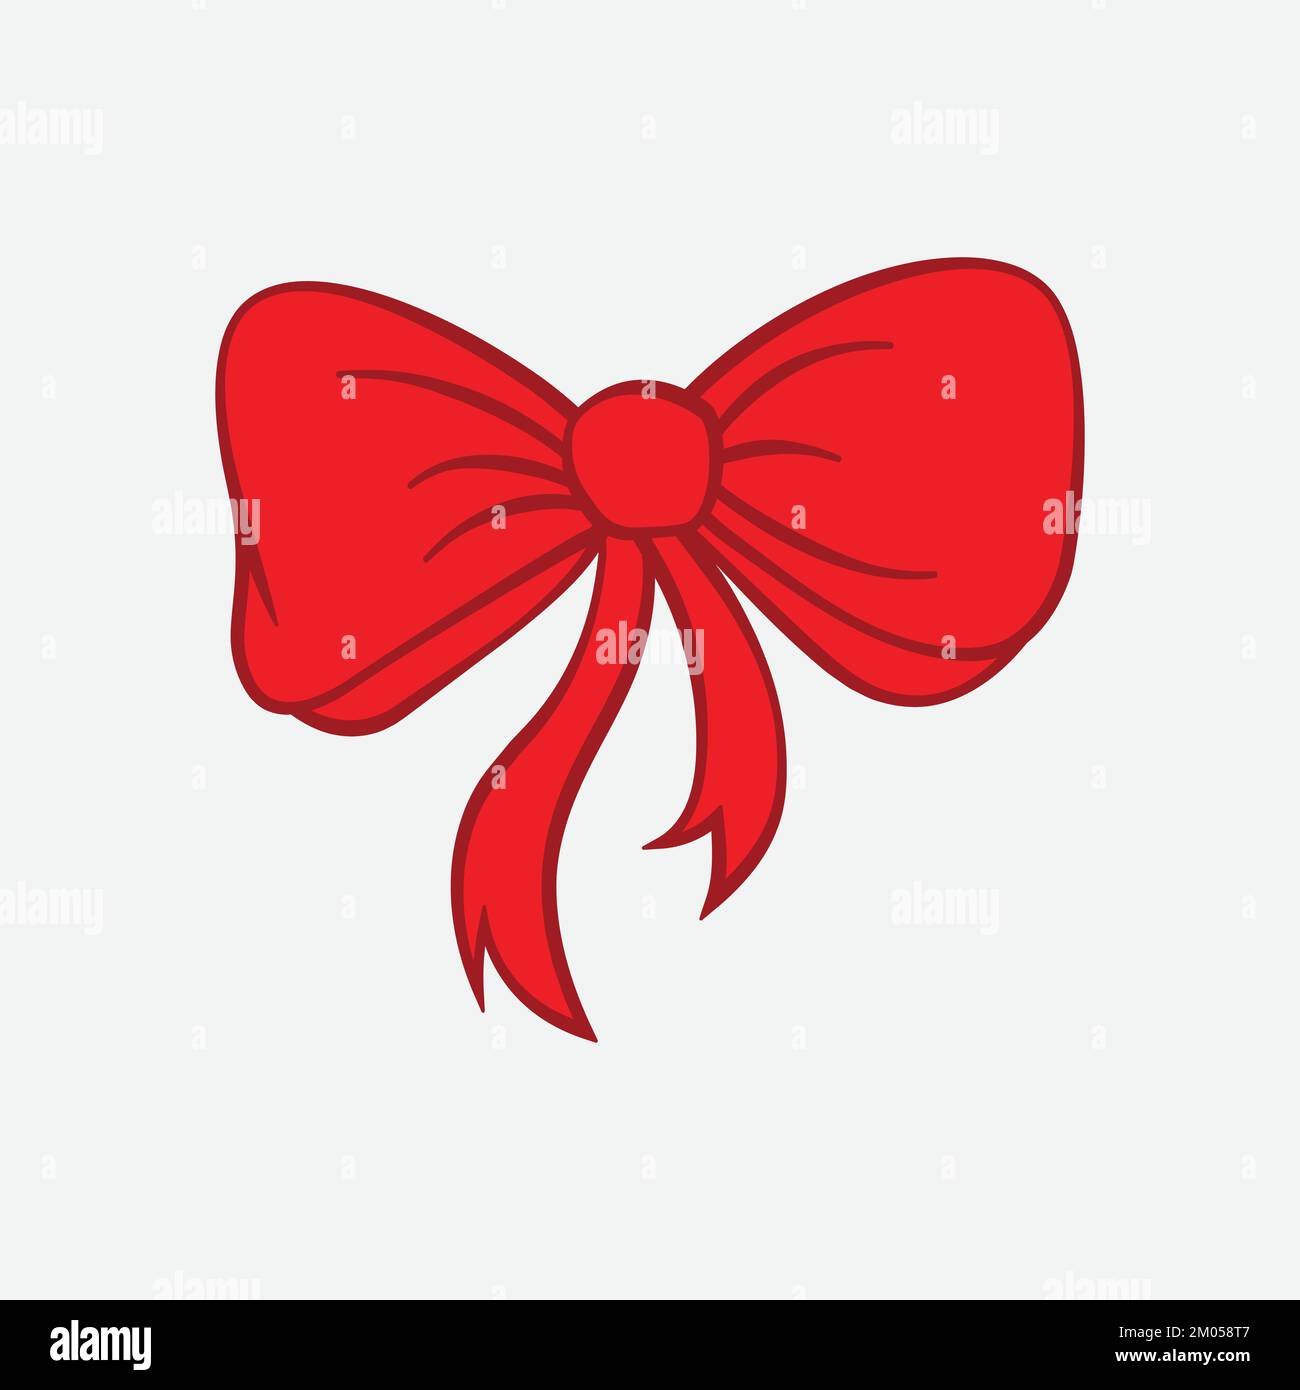 Red bow with ribbons icon. Decoration for holiday gifts and Christmas cards. Birthday party decor design element. Vector illustration Stock Vector